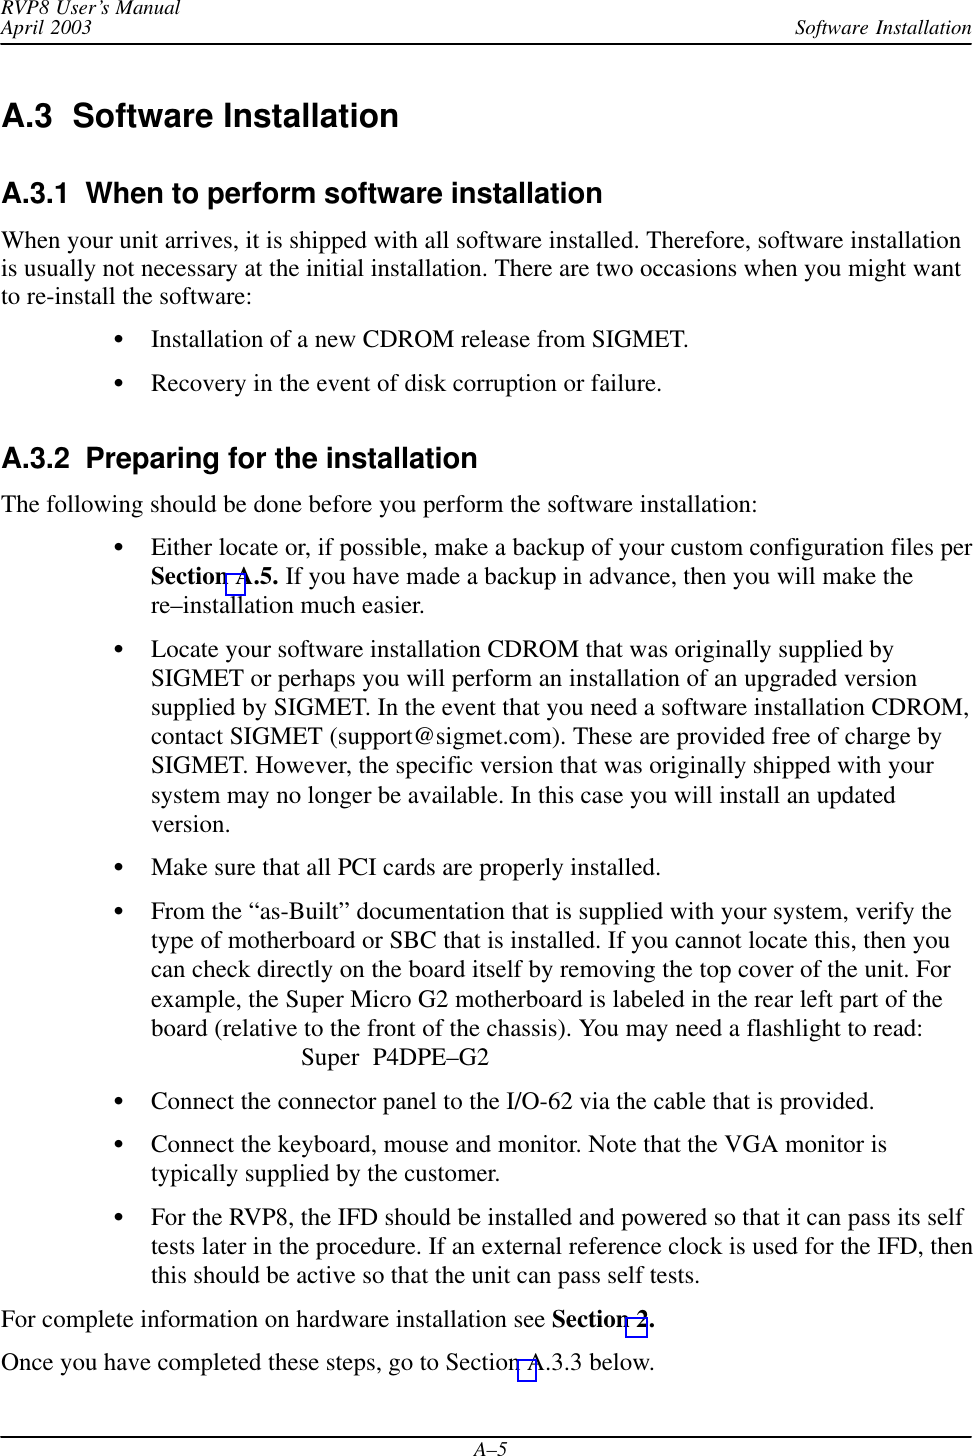 Software InstallationRVP8 User’s ManualApril 2003A–5A.3  Software InstallationA.3.1  When to perform software installationWhen your unit arrives, it is shipped with all software installed. Therefore, software installationis usually not necessary at the initial installation. There are two occasions when you might wantto re-install the software:Installation of a new CDROM release from SIGMET.Recovery in the event of disk corruption or failure.A.3.2  Preparing for the installationThe following should be done before you perform the software installation:Either locate or, if possible, make a backup of your custom configuration files perSection A.5. If you have made a backup in advance, then you will make there–installation much easier.Locate your software installation CDROM that was originally supplied bySIGMET or perhaps you will perform an installation of an upgraded versionsupplied by SIGMET. In the event that you need a software installation CDROM,contact SIGMET (support@sigmet.com). These are provided free of charge bySIGMET. However, the specific version that was originally shipped with yoursystem may no longer be available. In this case you will install an updatedversion.Make sure that all PCI cards are properly installed.From the “as-Built” documentation that is supplied with your system, verify thetype of motherboard or SBC that is installed. If you cannot locate this, then youcan check directly on the board itself by removing the top cover of the unit. Forexample, the Super Micro G2 motherboard is labeled in the rear left part of theboard (relative to the front of the chassis). You may need a flashlight to read:Super  P4DPE–G2Connect the connector panel to the I/O-62 via the cable that is provided.Connect the keyboard, mouse and monitor. Note that the VGA monitor istypically supplied by the customer.For the RVP8, the IFD should be installed and powered so that it can pass its selftests later in the procedure. If an external reference clock is used for the IFD, thenthis should be active so that the unit can pass self tests.For complete information on hardware installation see Section 2.Once you have completed these steps, go to Section A.3.3 below.